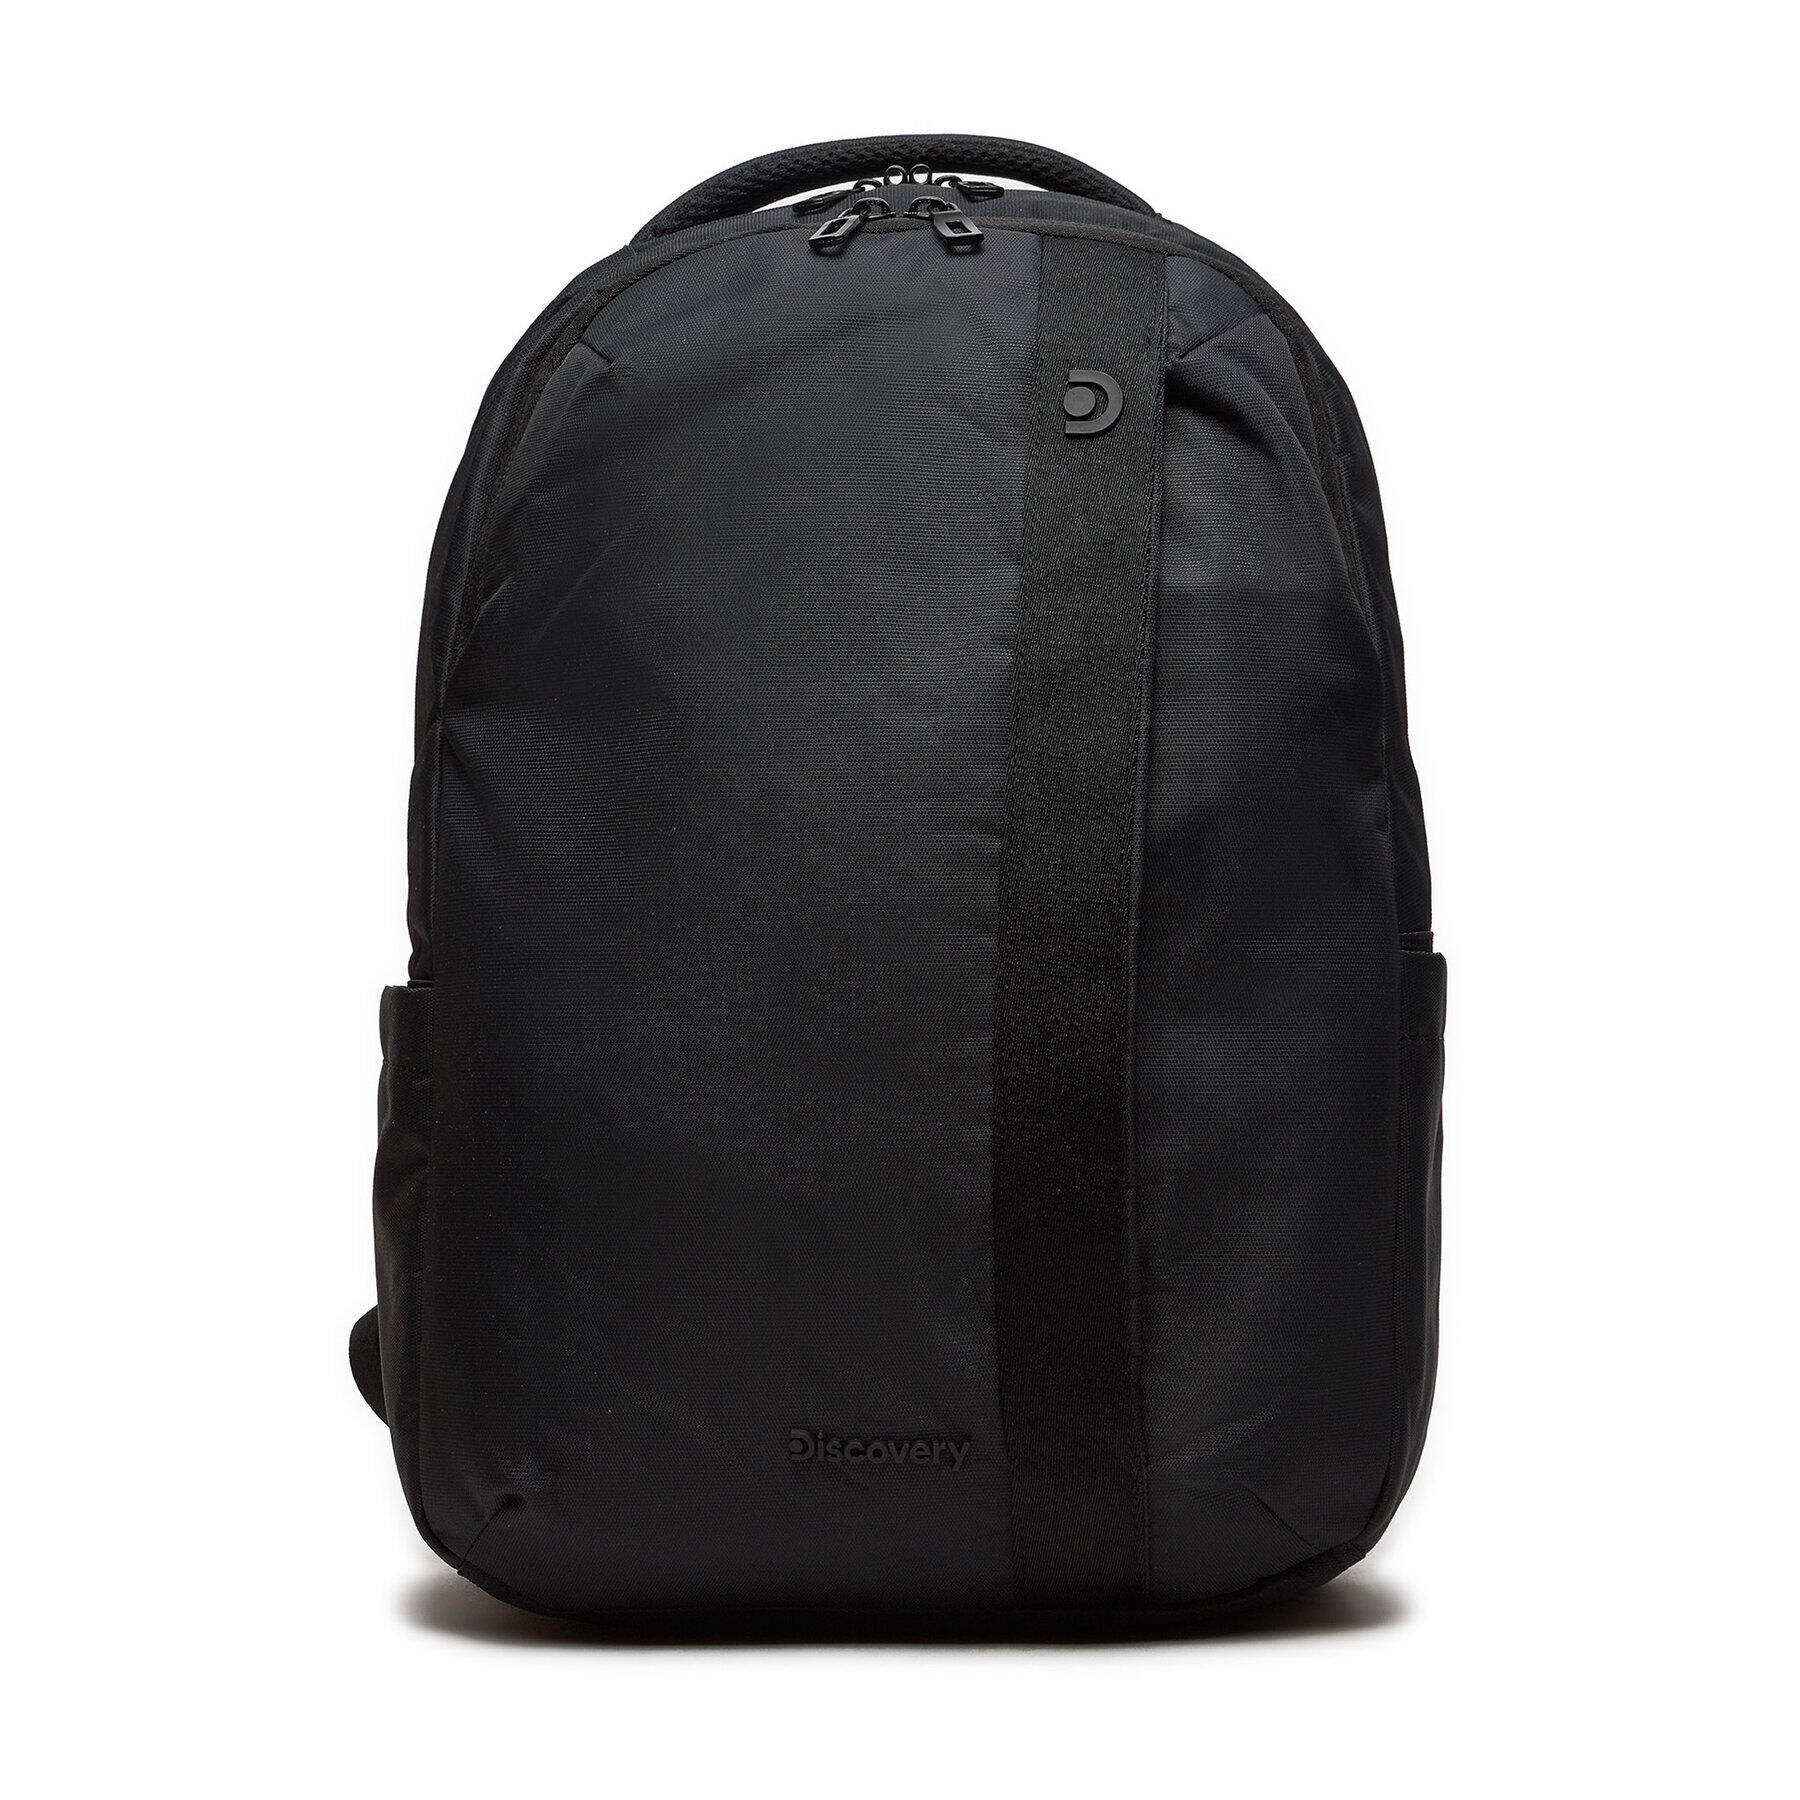 Rucksack Discovery Computer Backpack D00941.06 Black OS male